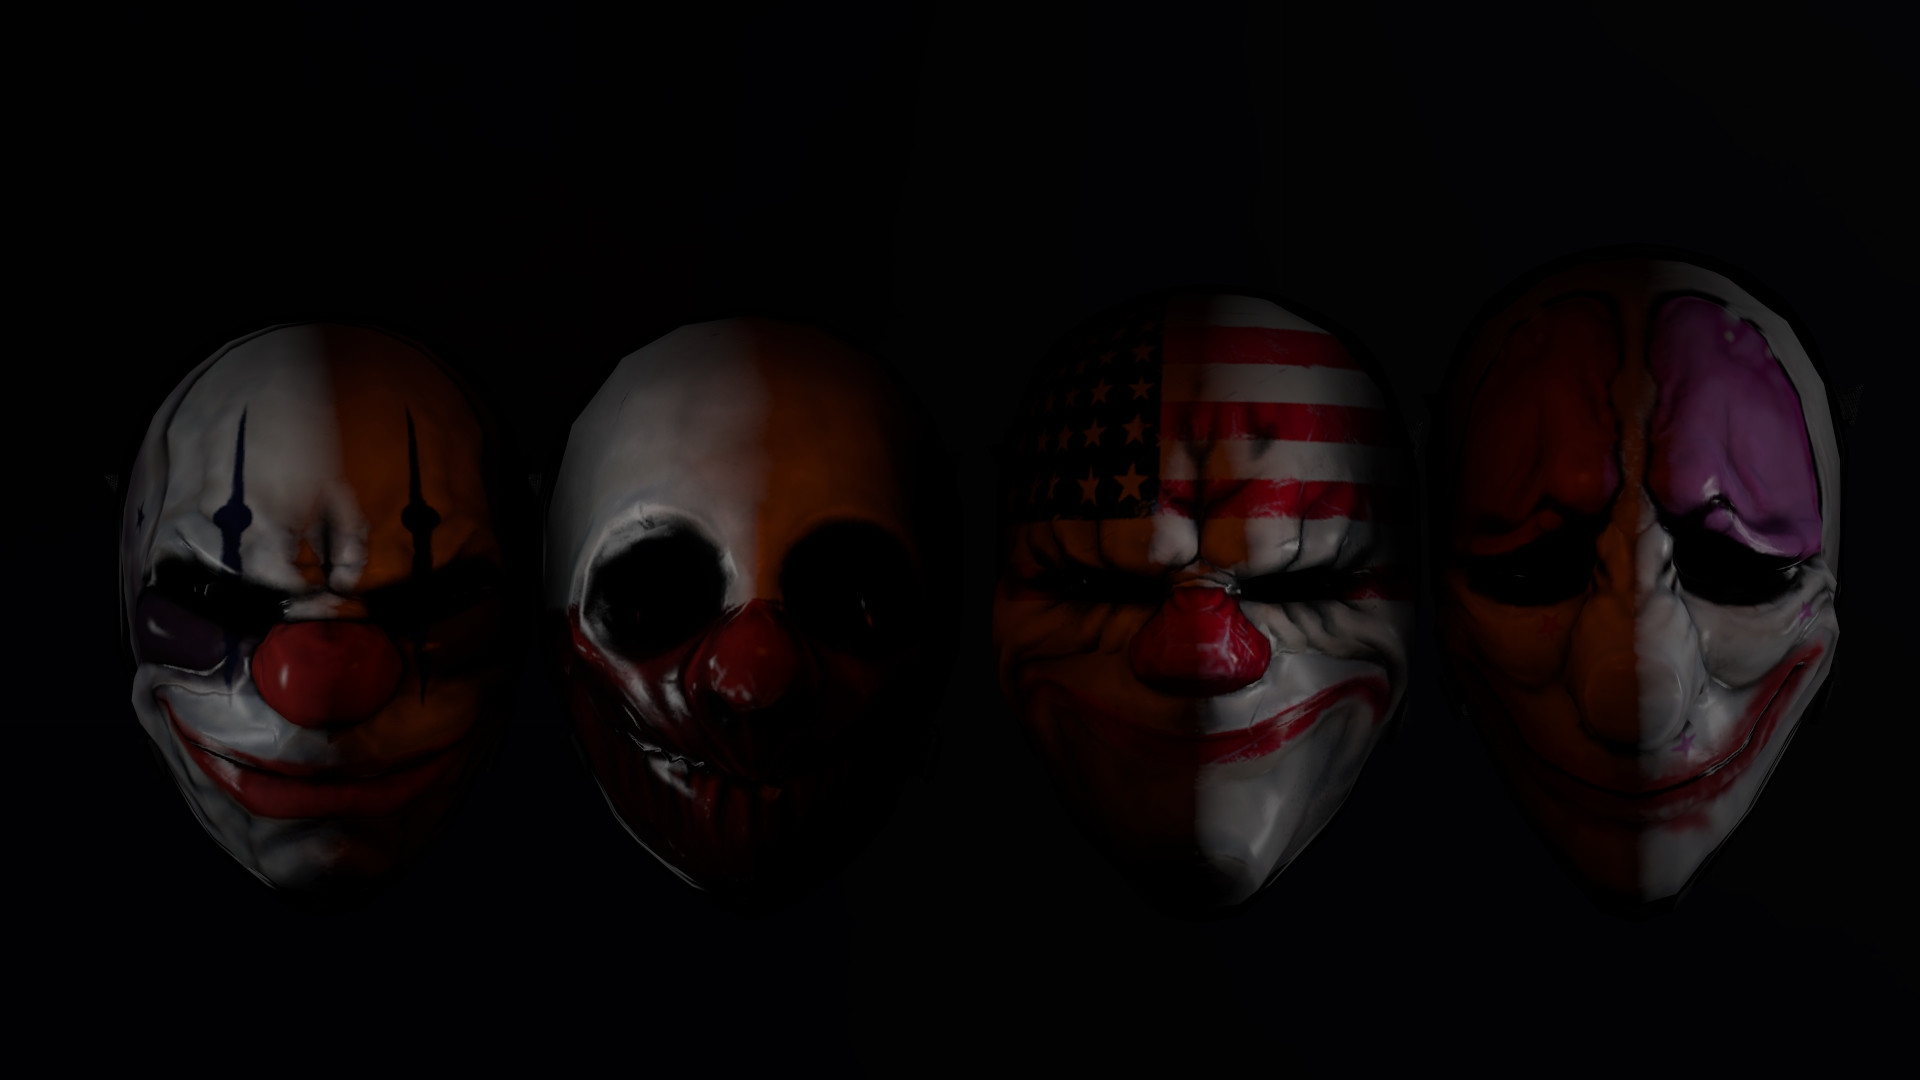 Chains Payday Dallas Payday Houston Payday Payday 2 Wolf Payday 1920x1080